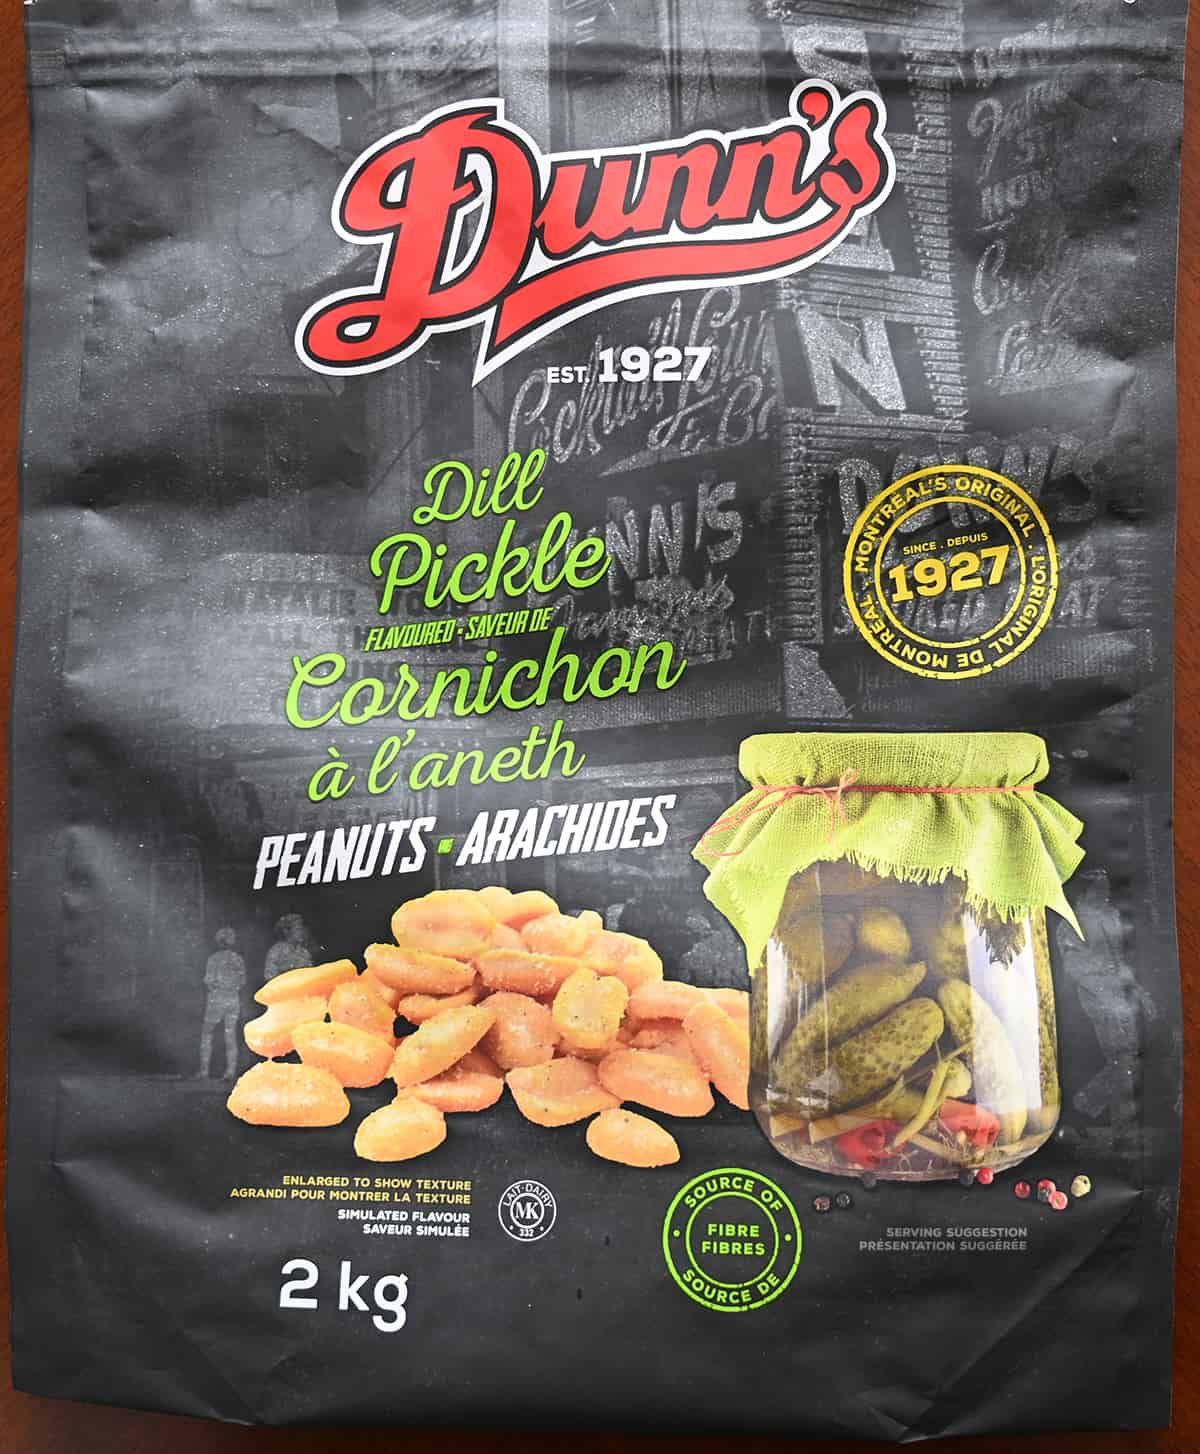 Closeup image of the front of the bag of peanuts showing that the flavor is simulated and the bag weighs two kilograms. 